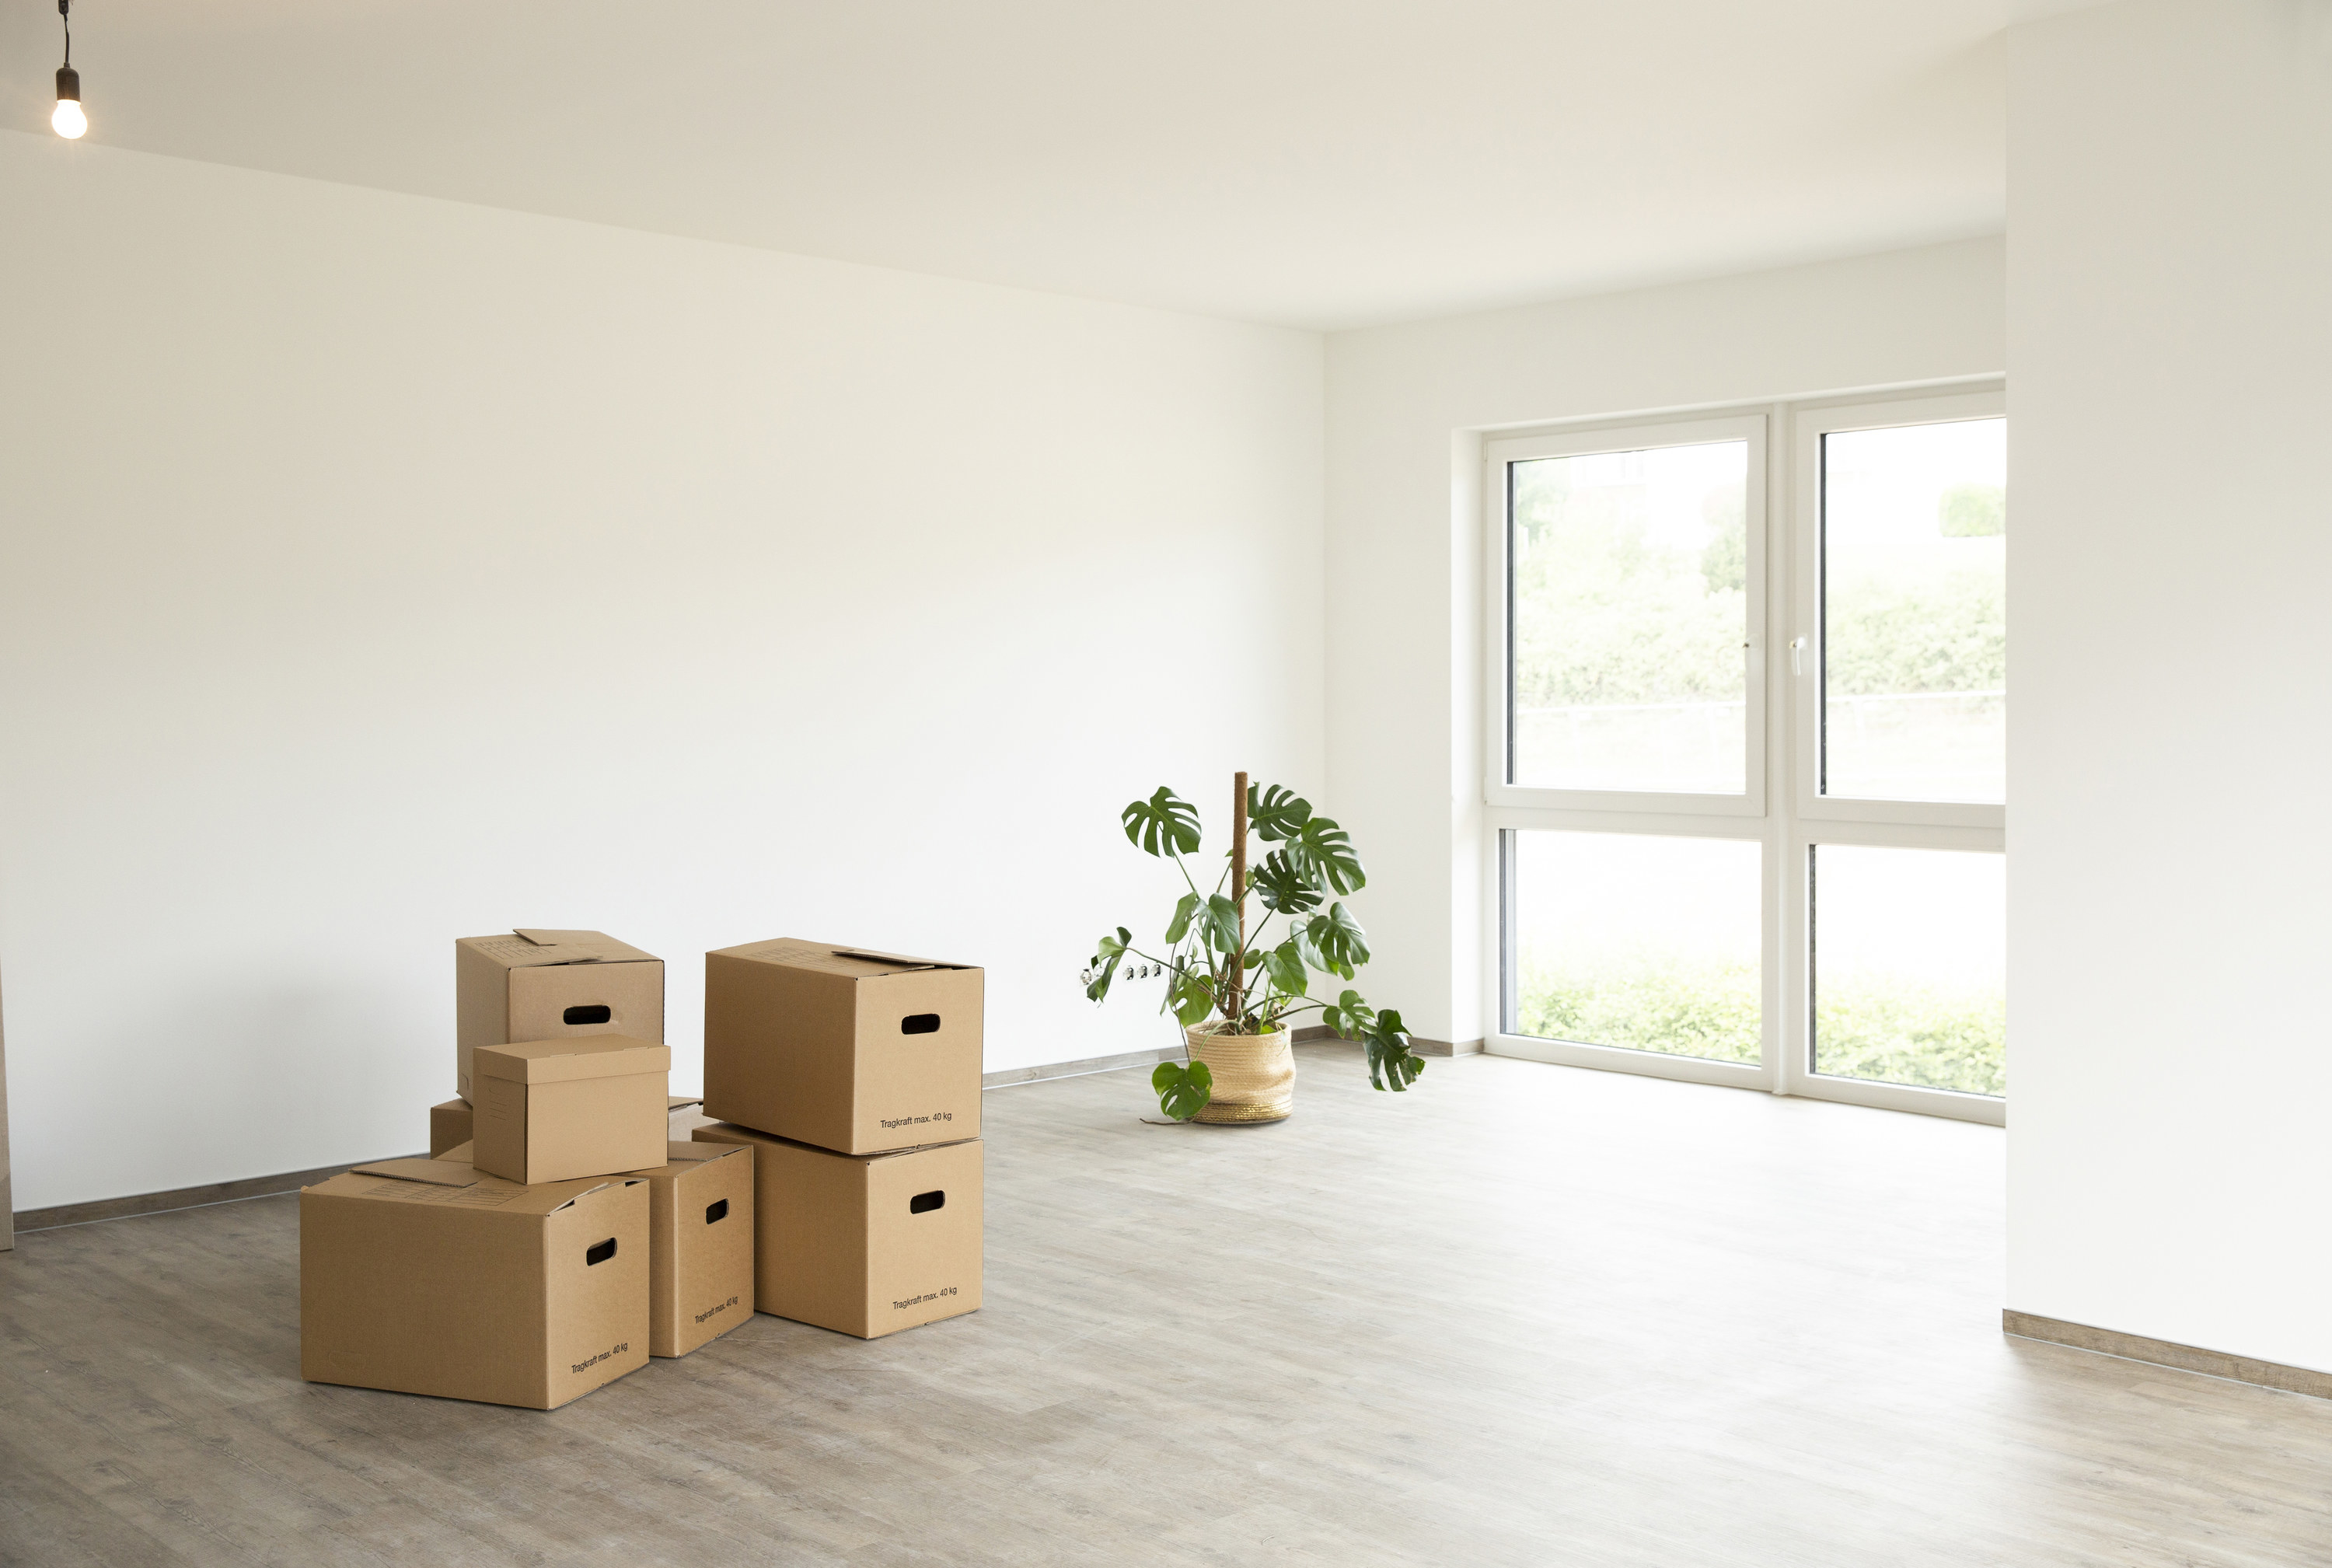 An empty apartment except for a few boxes and a plant